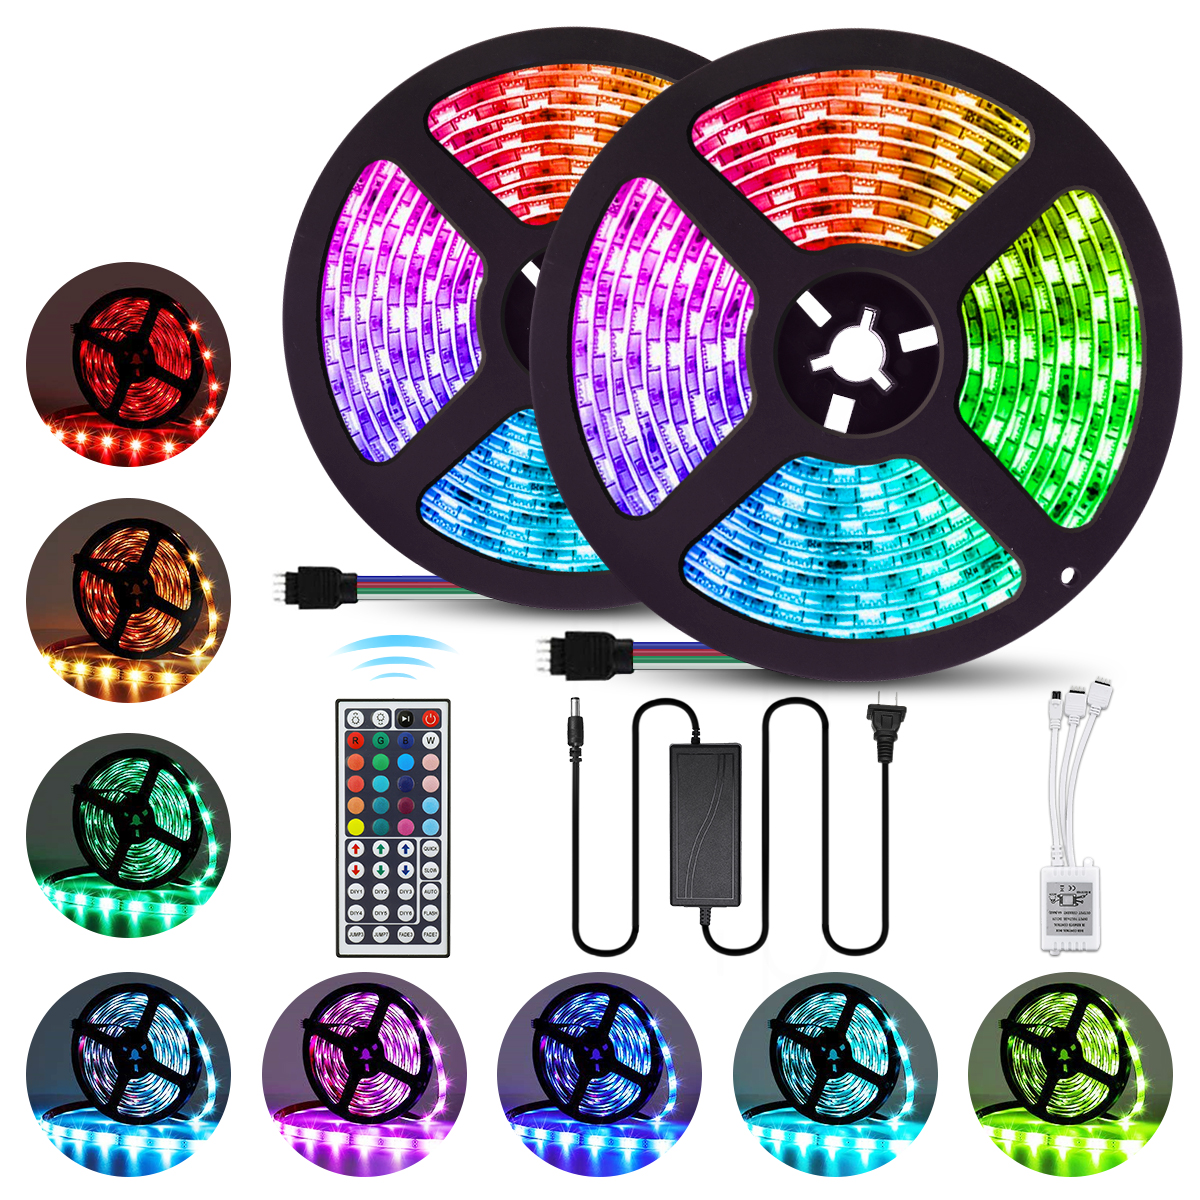 Find 2PCS 5M LED Strip Light IP65 5050 RGB Flexible TV Backlight DC12V With 44Keys Remote Control Power Adapter for Sale on Gipsybee.com with cryptocurrencies